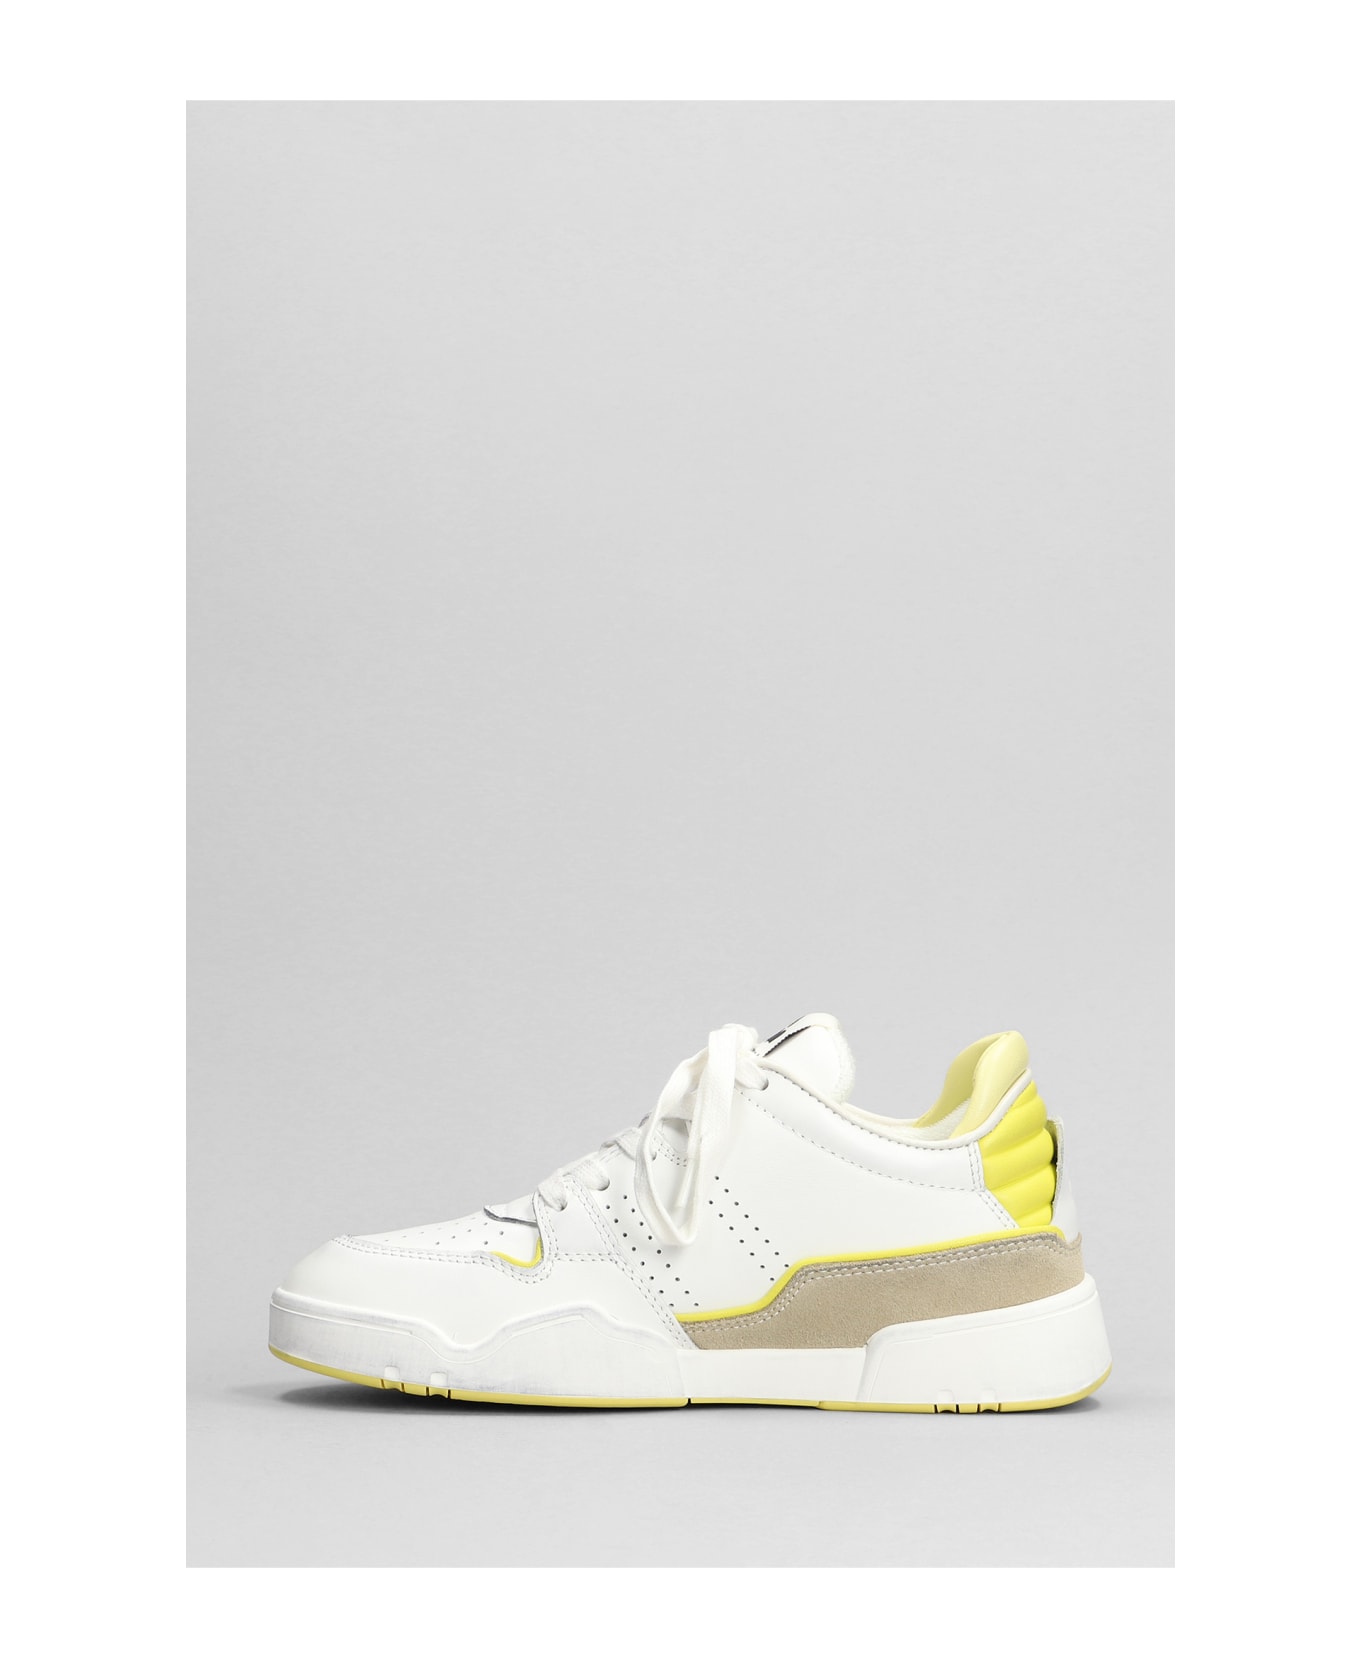 Isabel Marant Emree Sneakers In White Suede And Leather - Liye Light Yellow